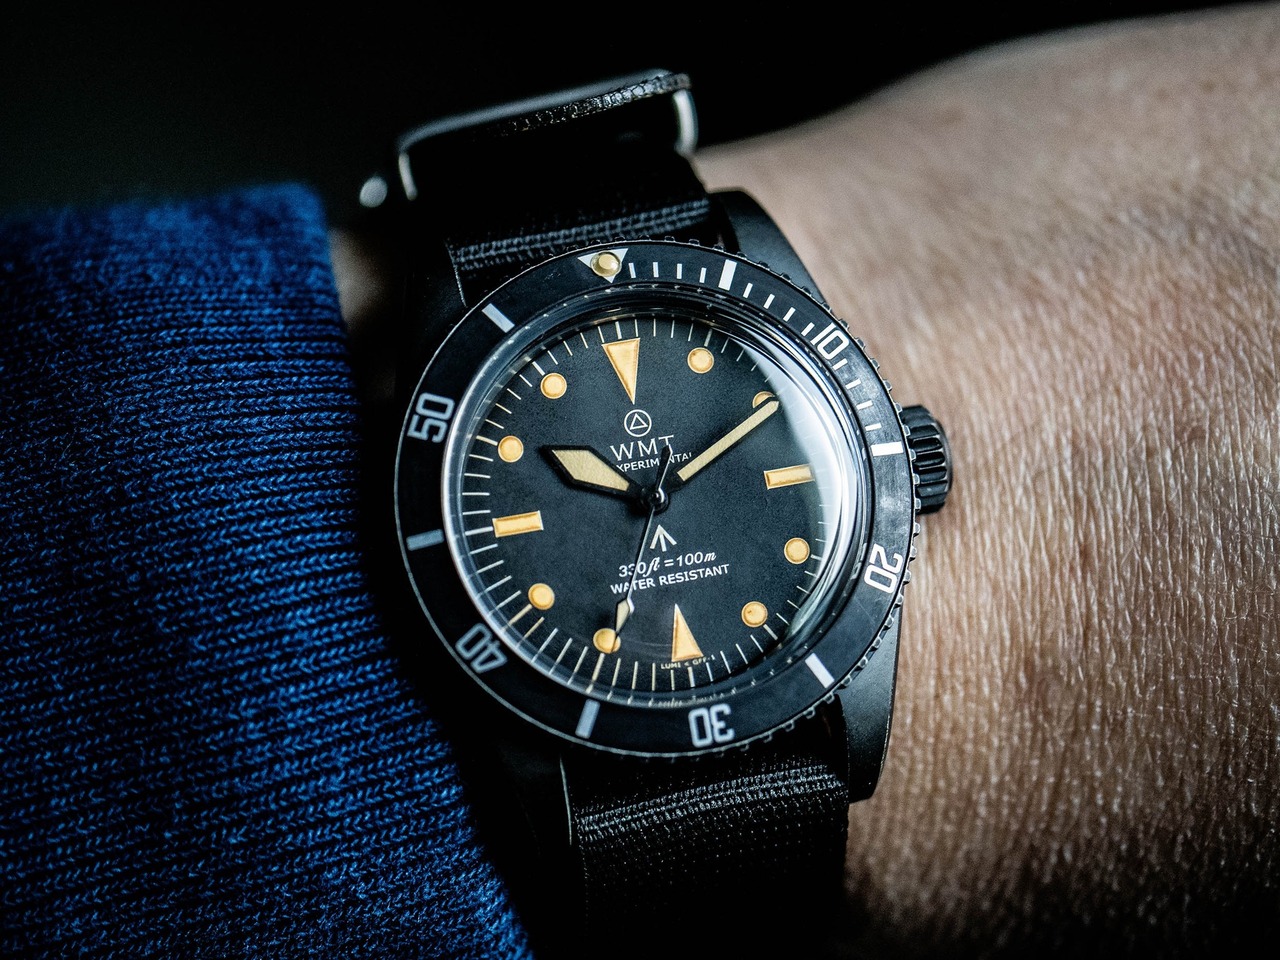 WMT WATCHES Sea Diver – Royal Navy / Black Edition ( Aged ) Limited 50 pcs